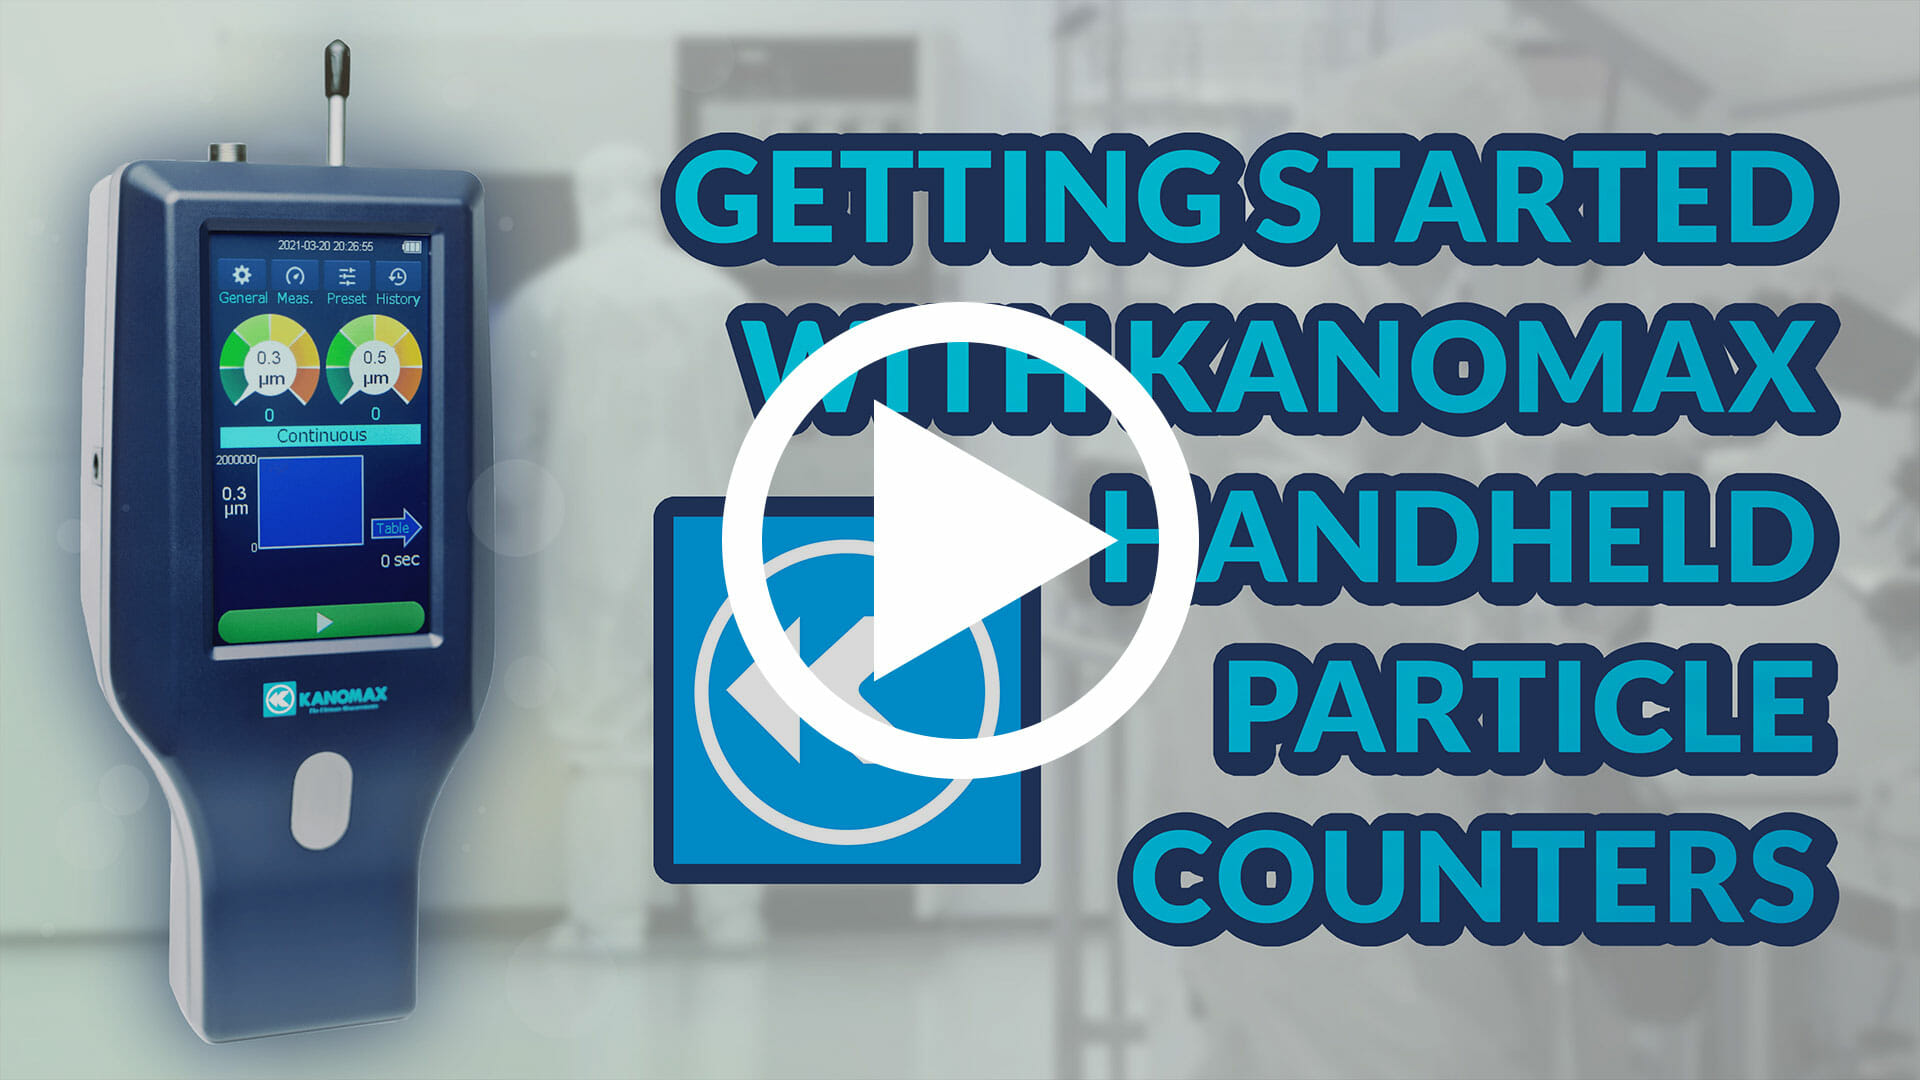 Getting Started with Kanomax Handheld Particle Counters Image